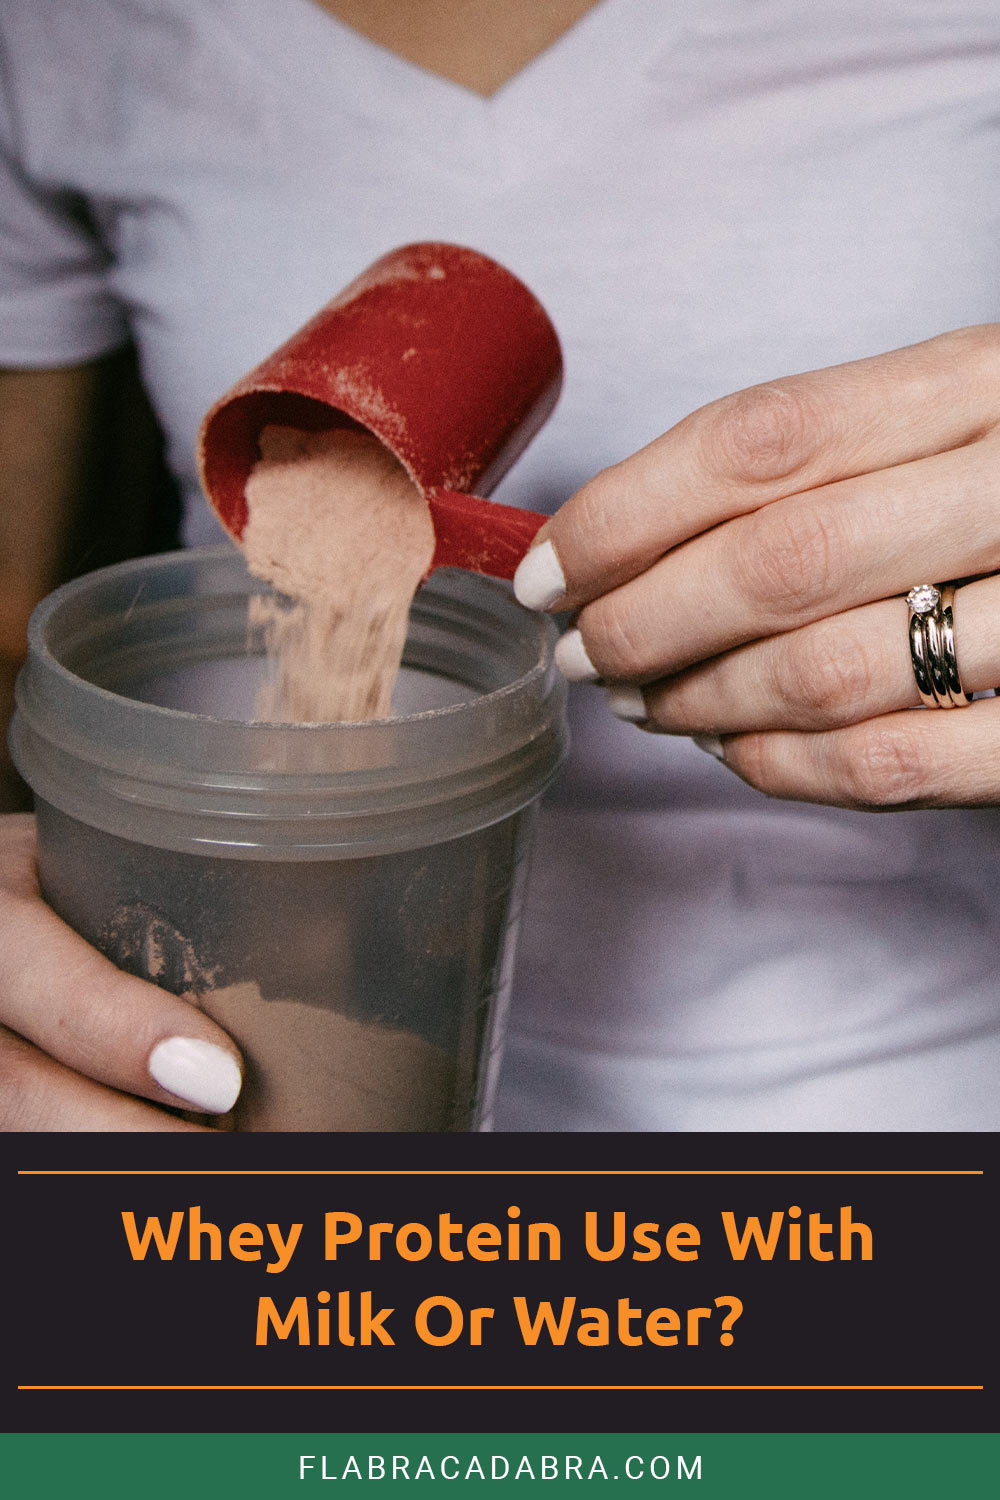 Whey Protein Use With Milk Or Water?